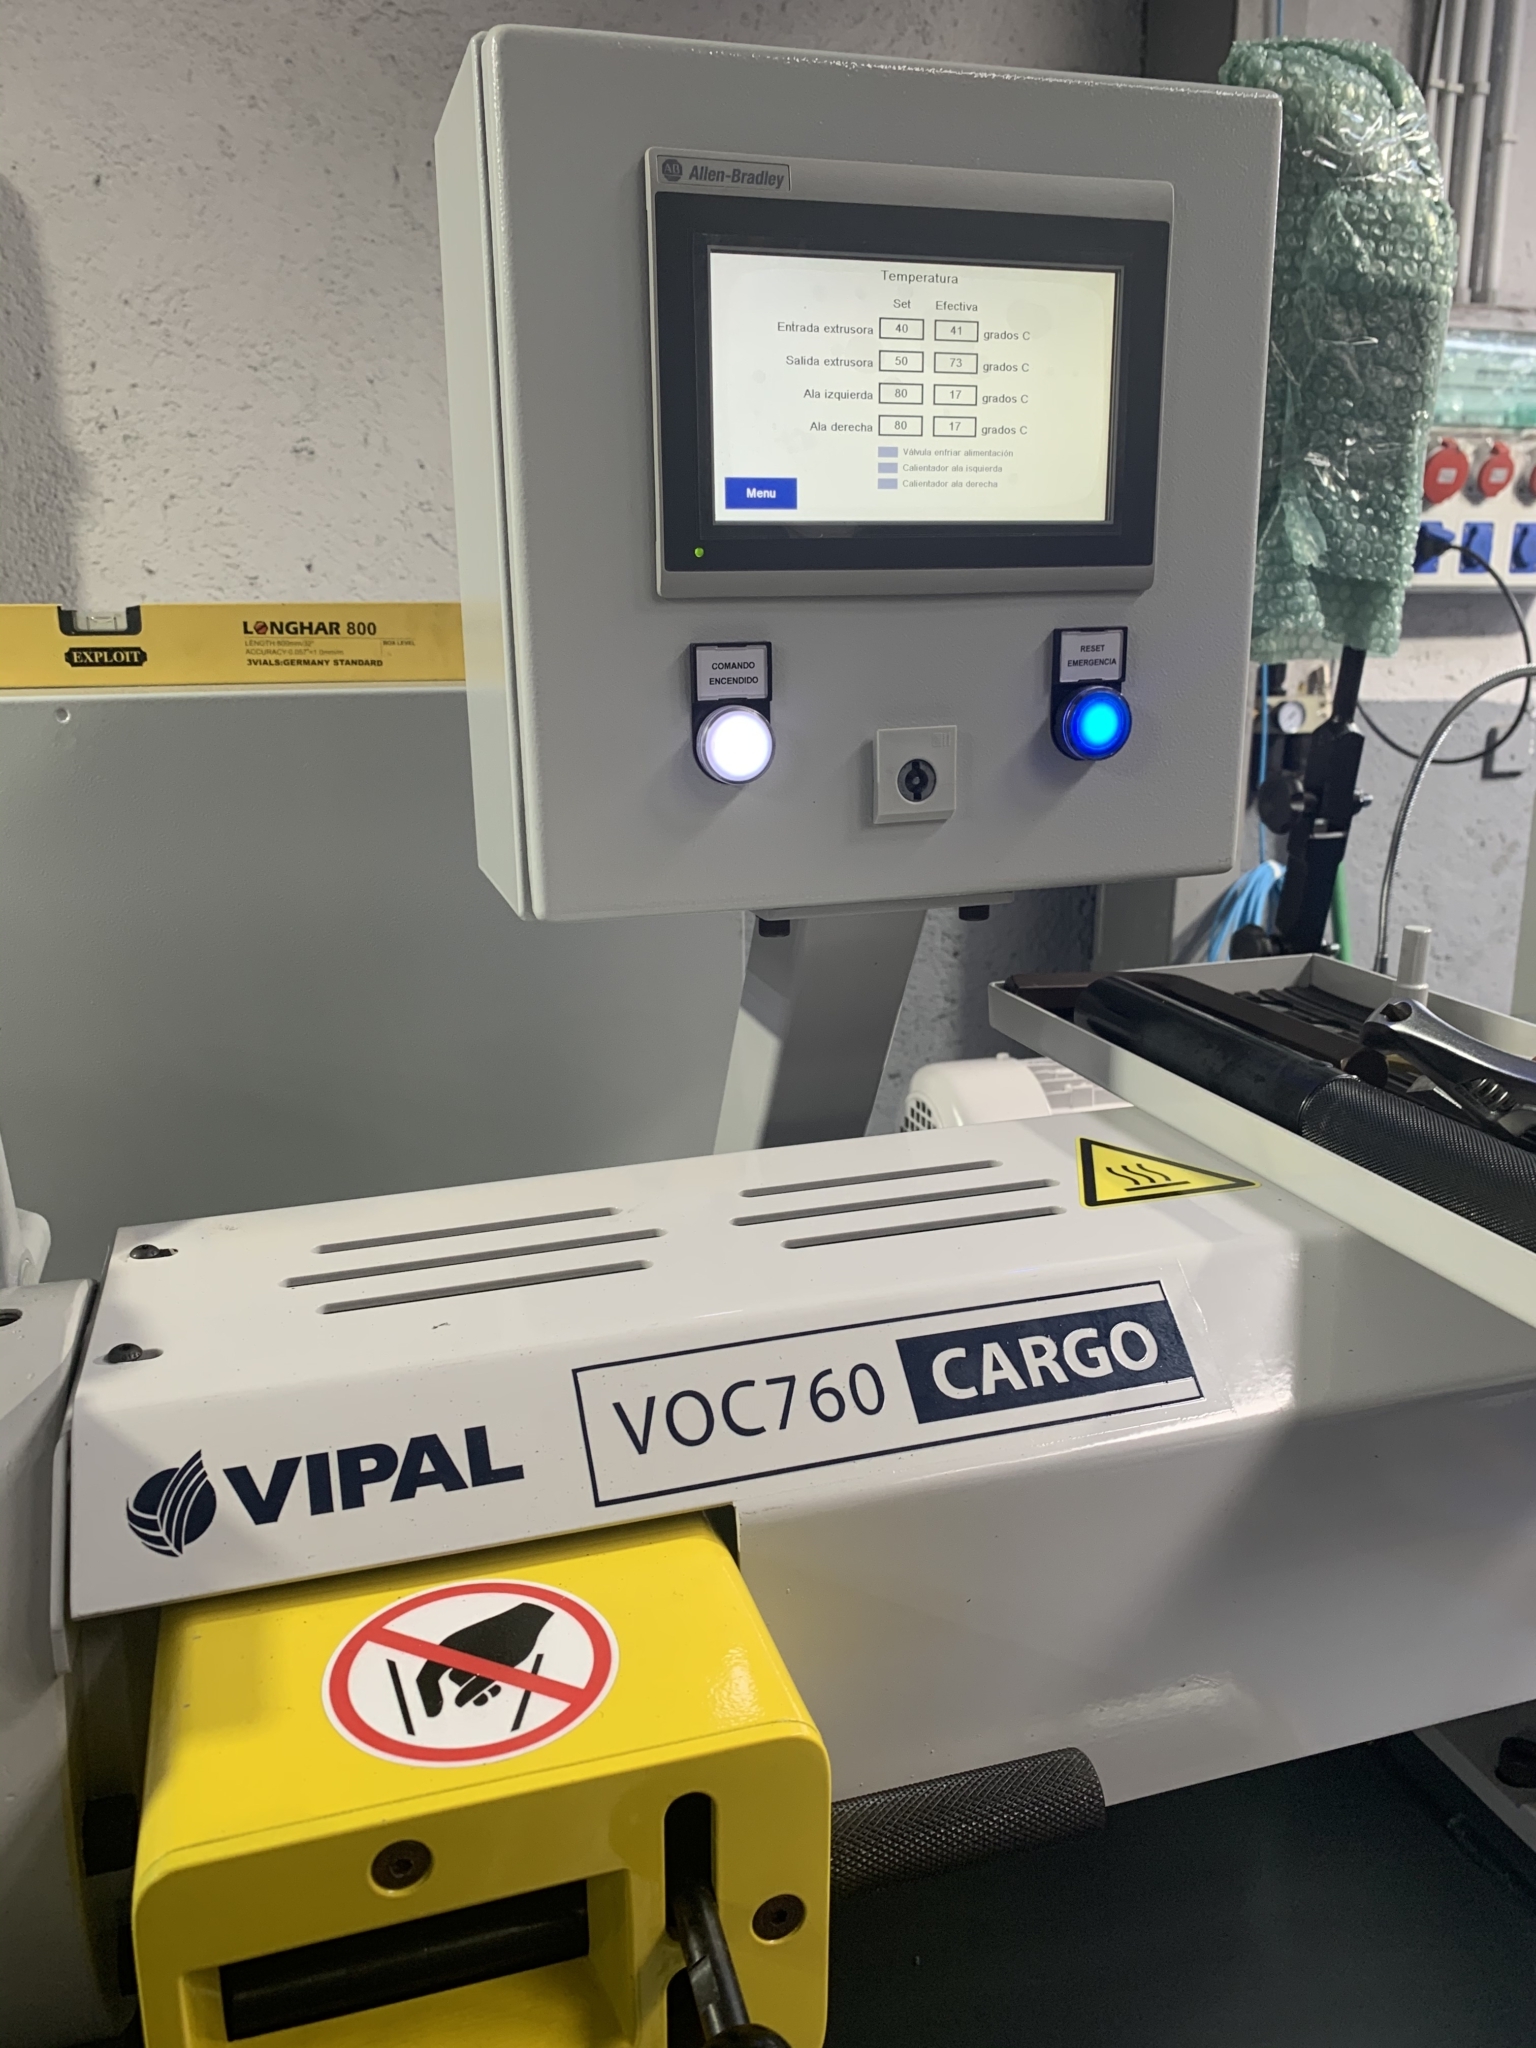 Spanish retreader is first in Europe to buy Vipal machinery